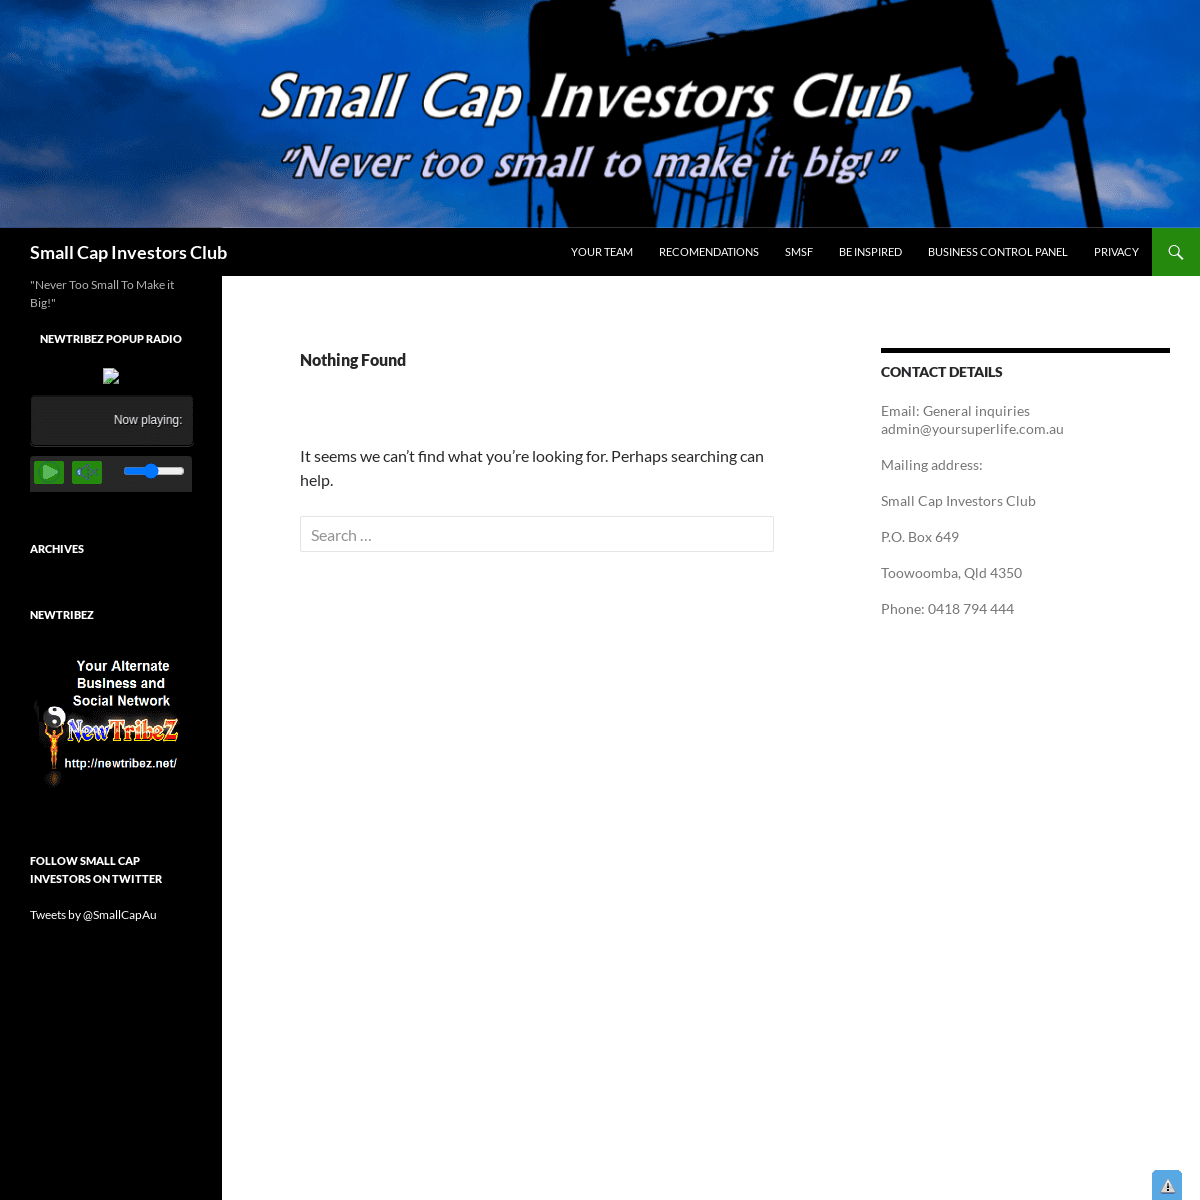 A complete backup of https://smallcapinvestors.net